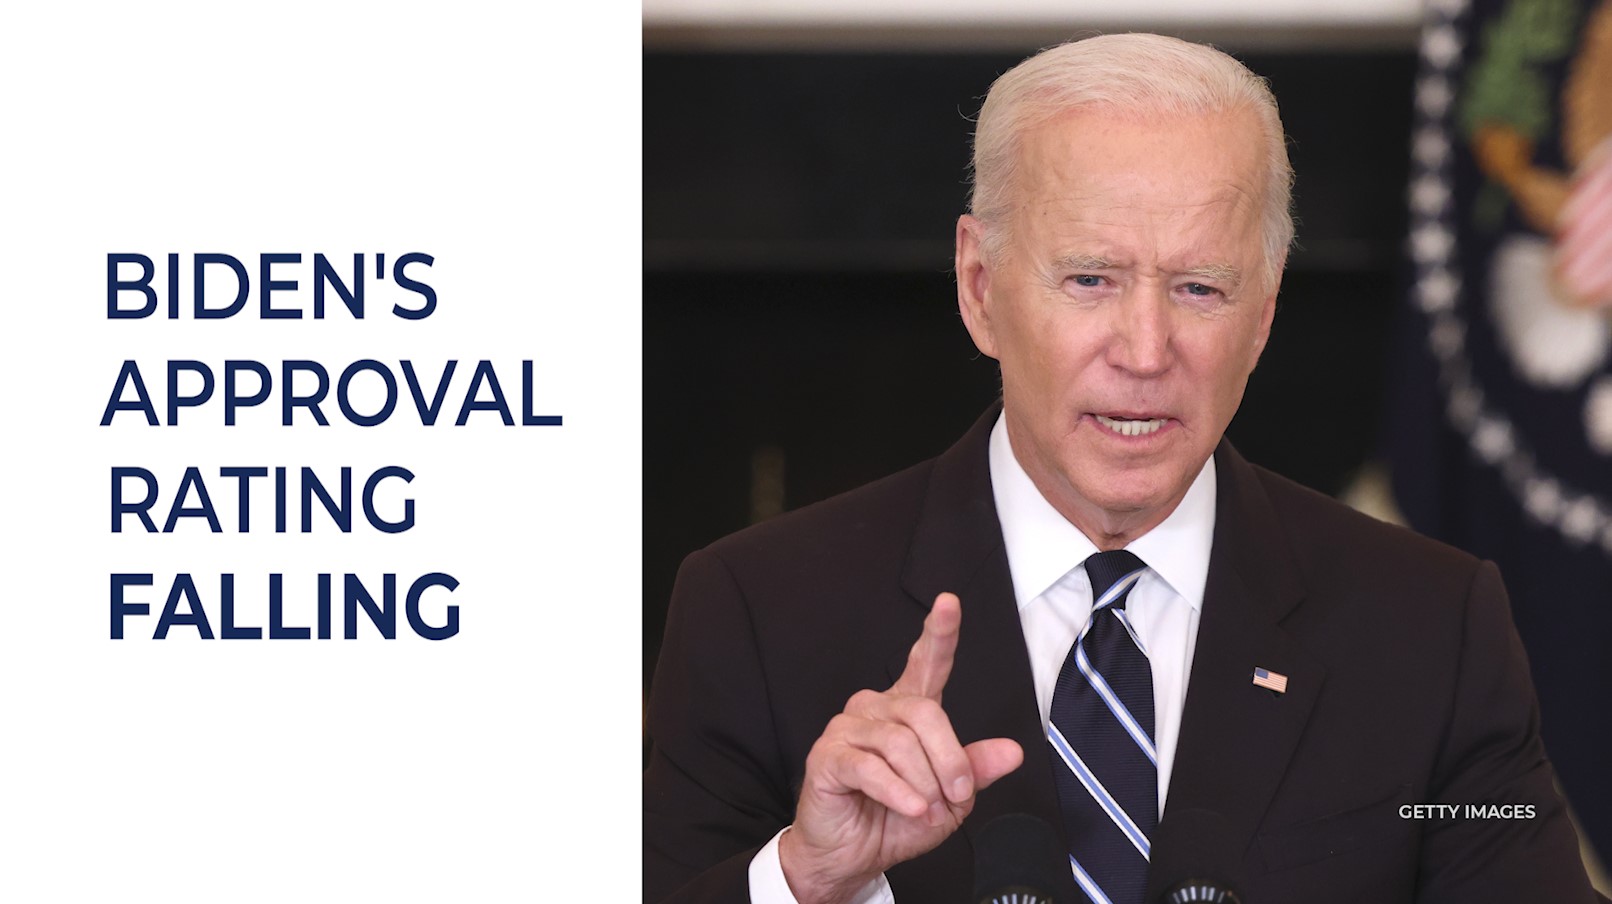 President Biden has seen his approval rating poll numbers drop over the last few weeks.